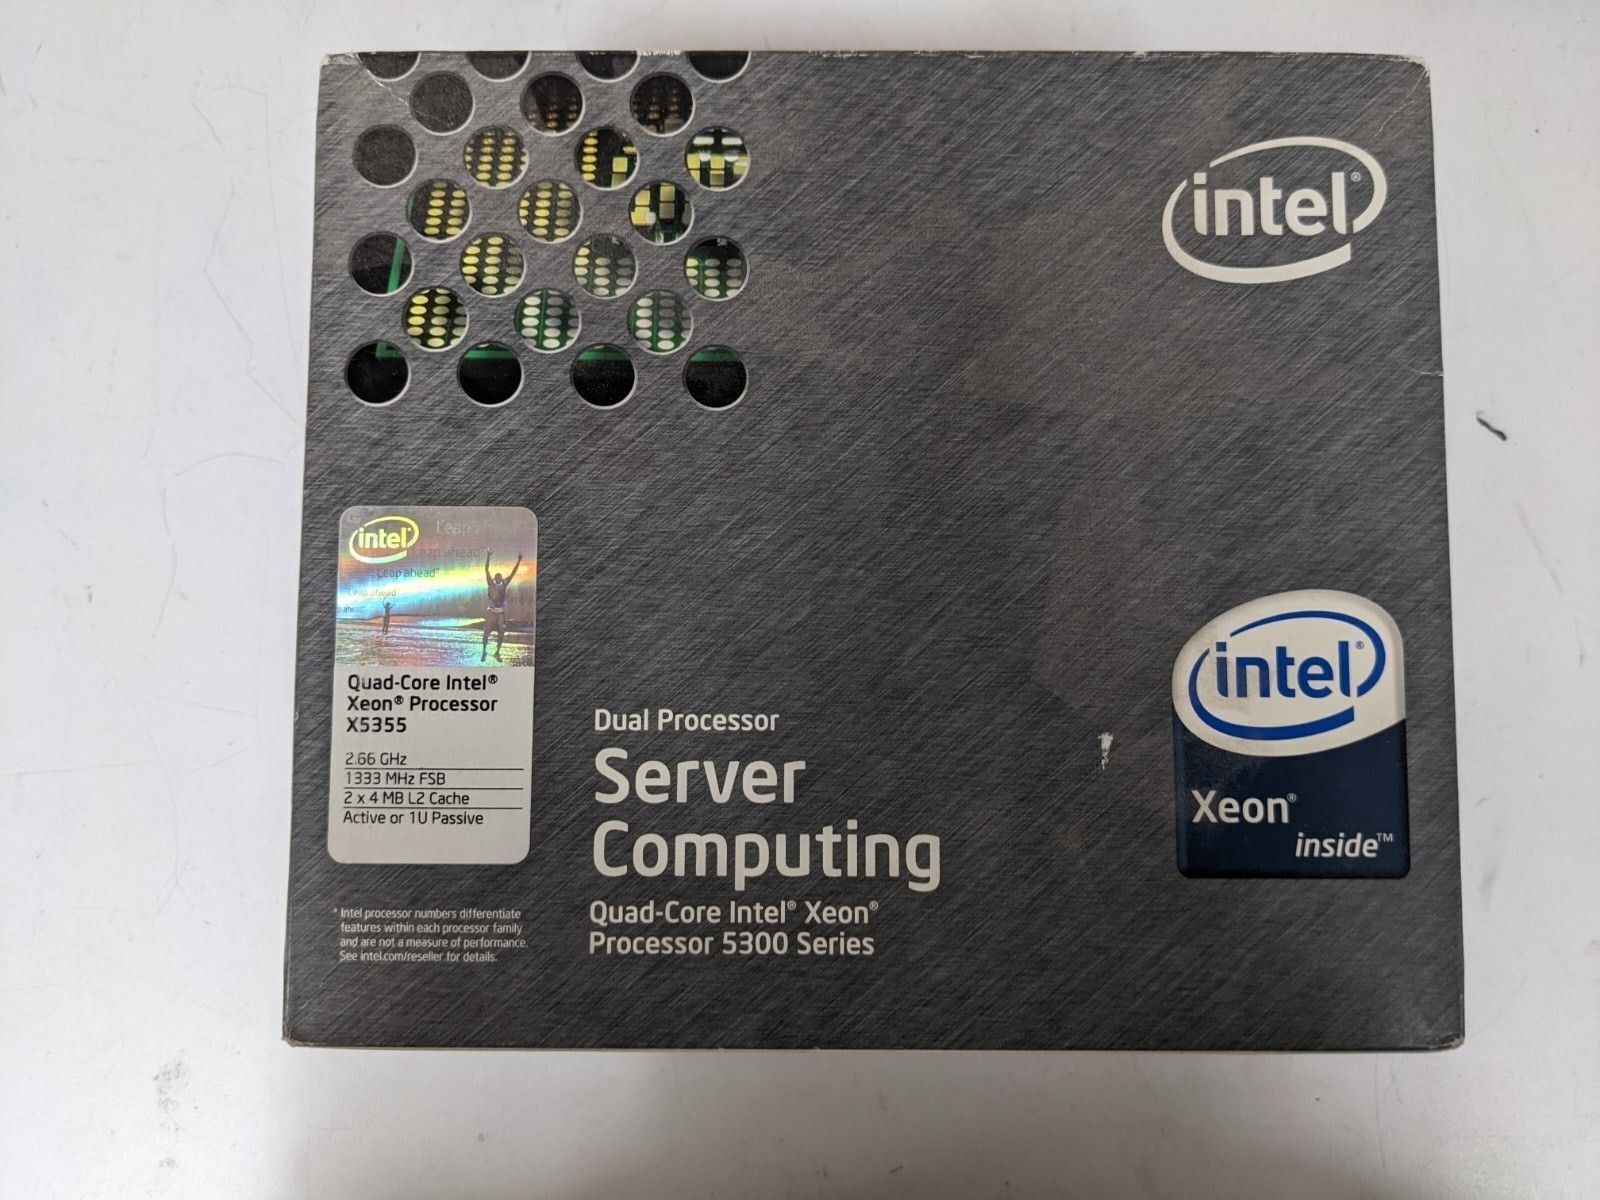 Intel Xeon X5355 Quad-Core 2.66 GHz PC Server CPU *New Old Stock* *Untested*